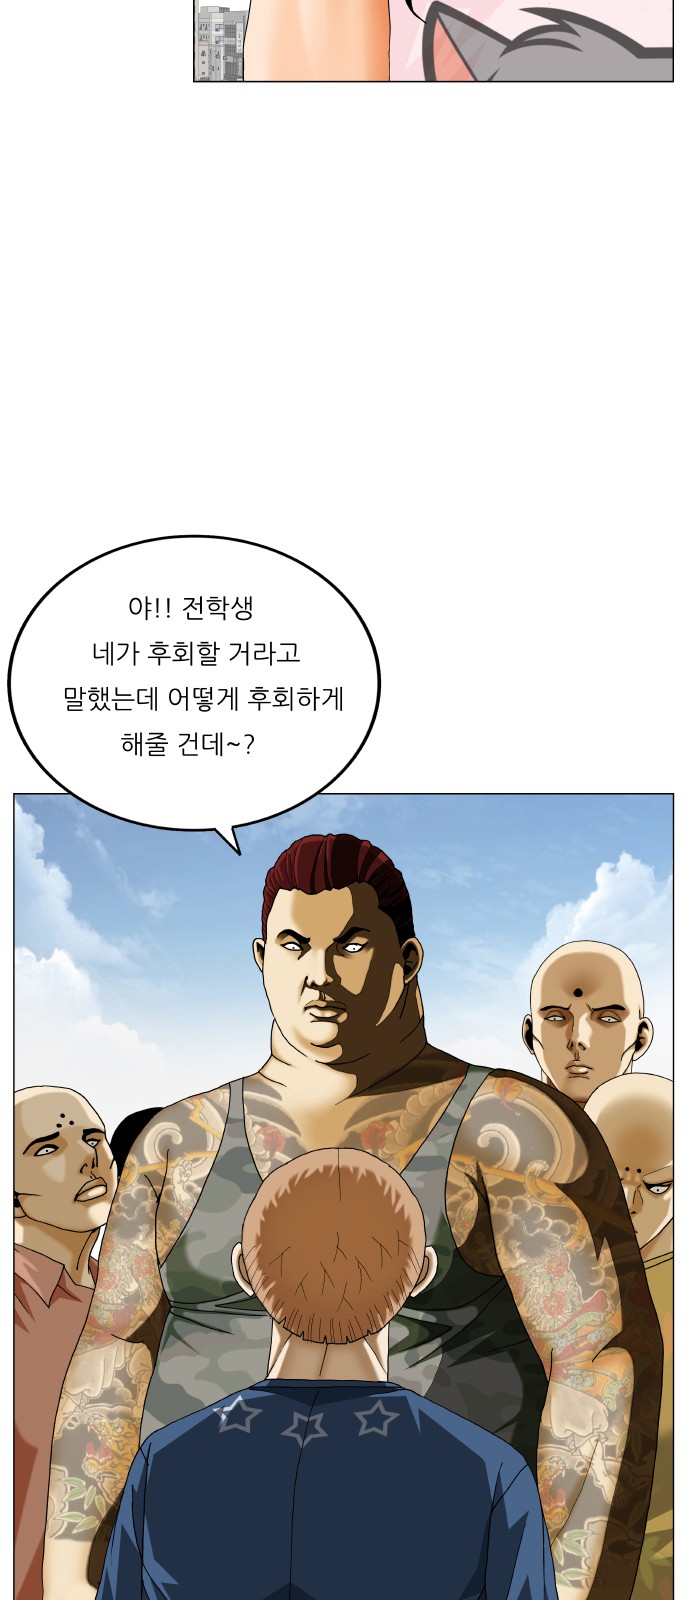 Ultimate Legend - Kang Hae Hyo - Chapter 465 - Page 3